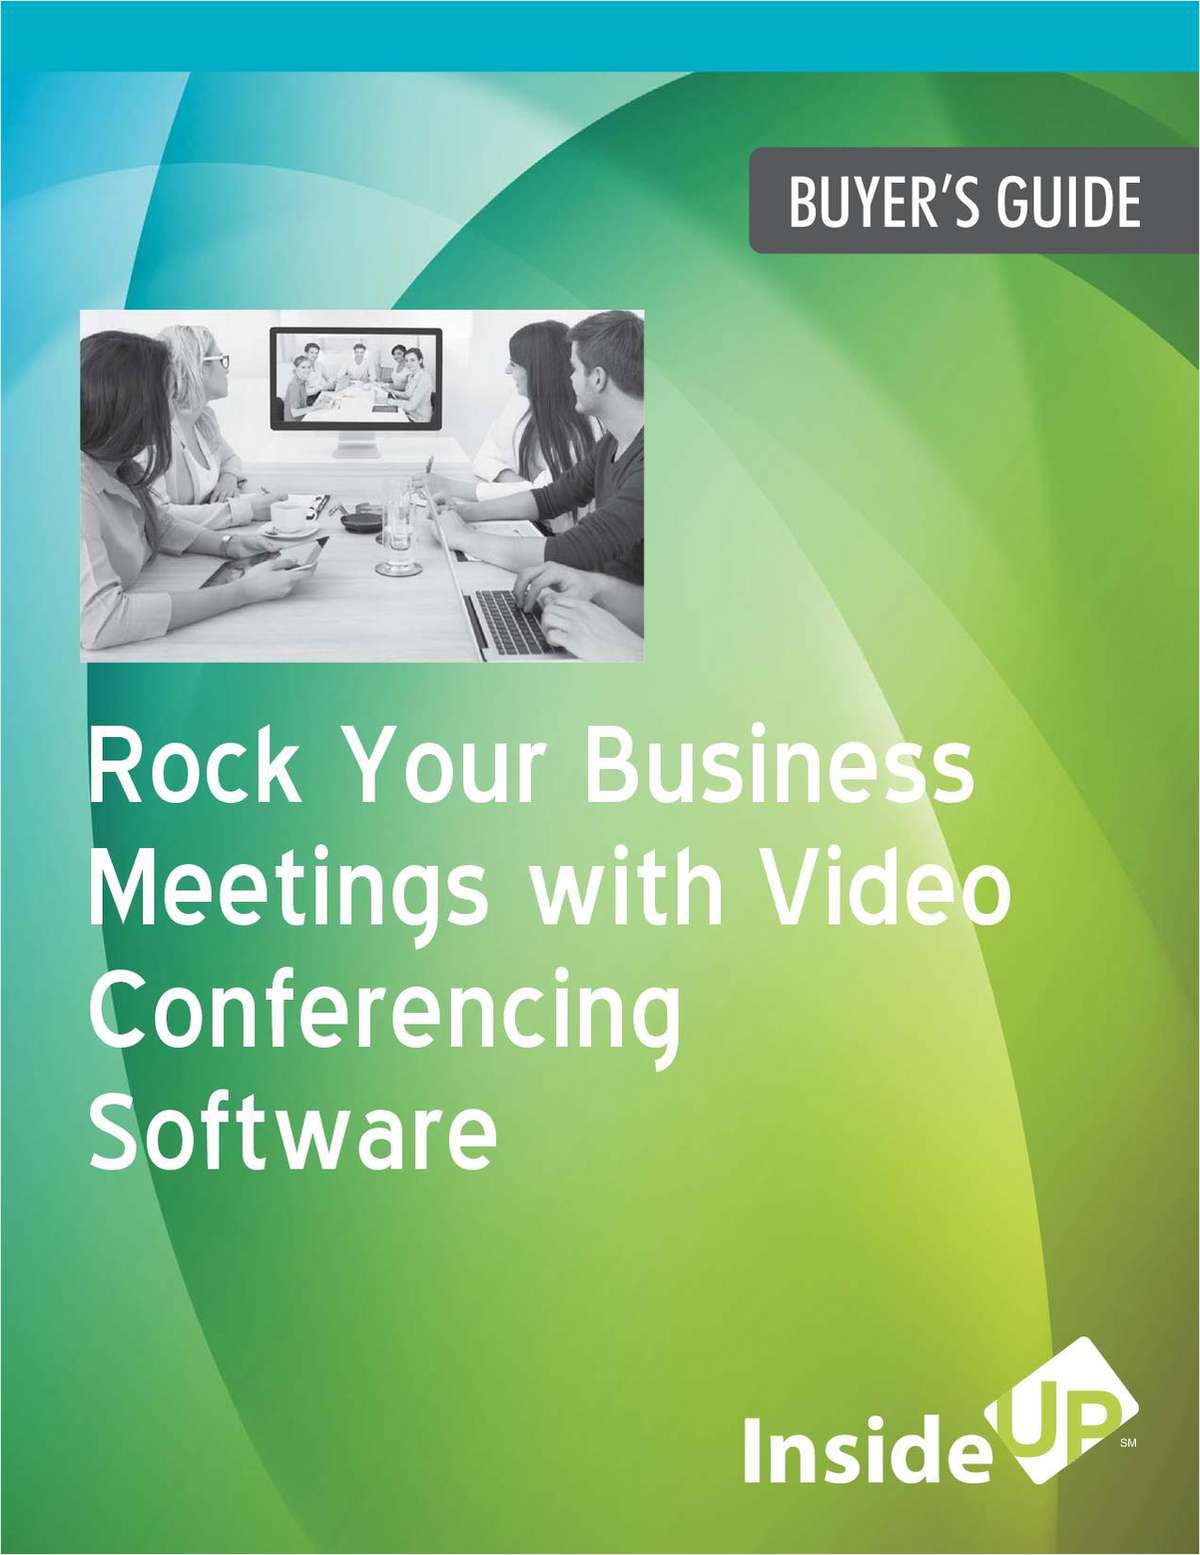 Rock Your Business Meetings with Video Conferencing Software